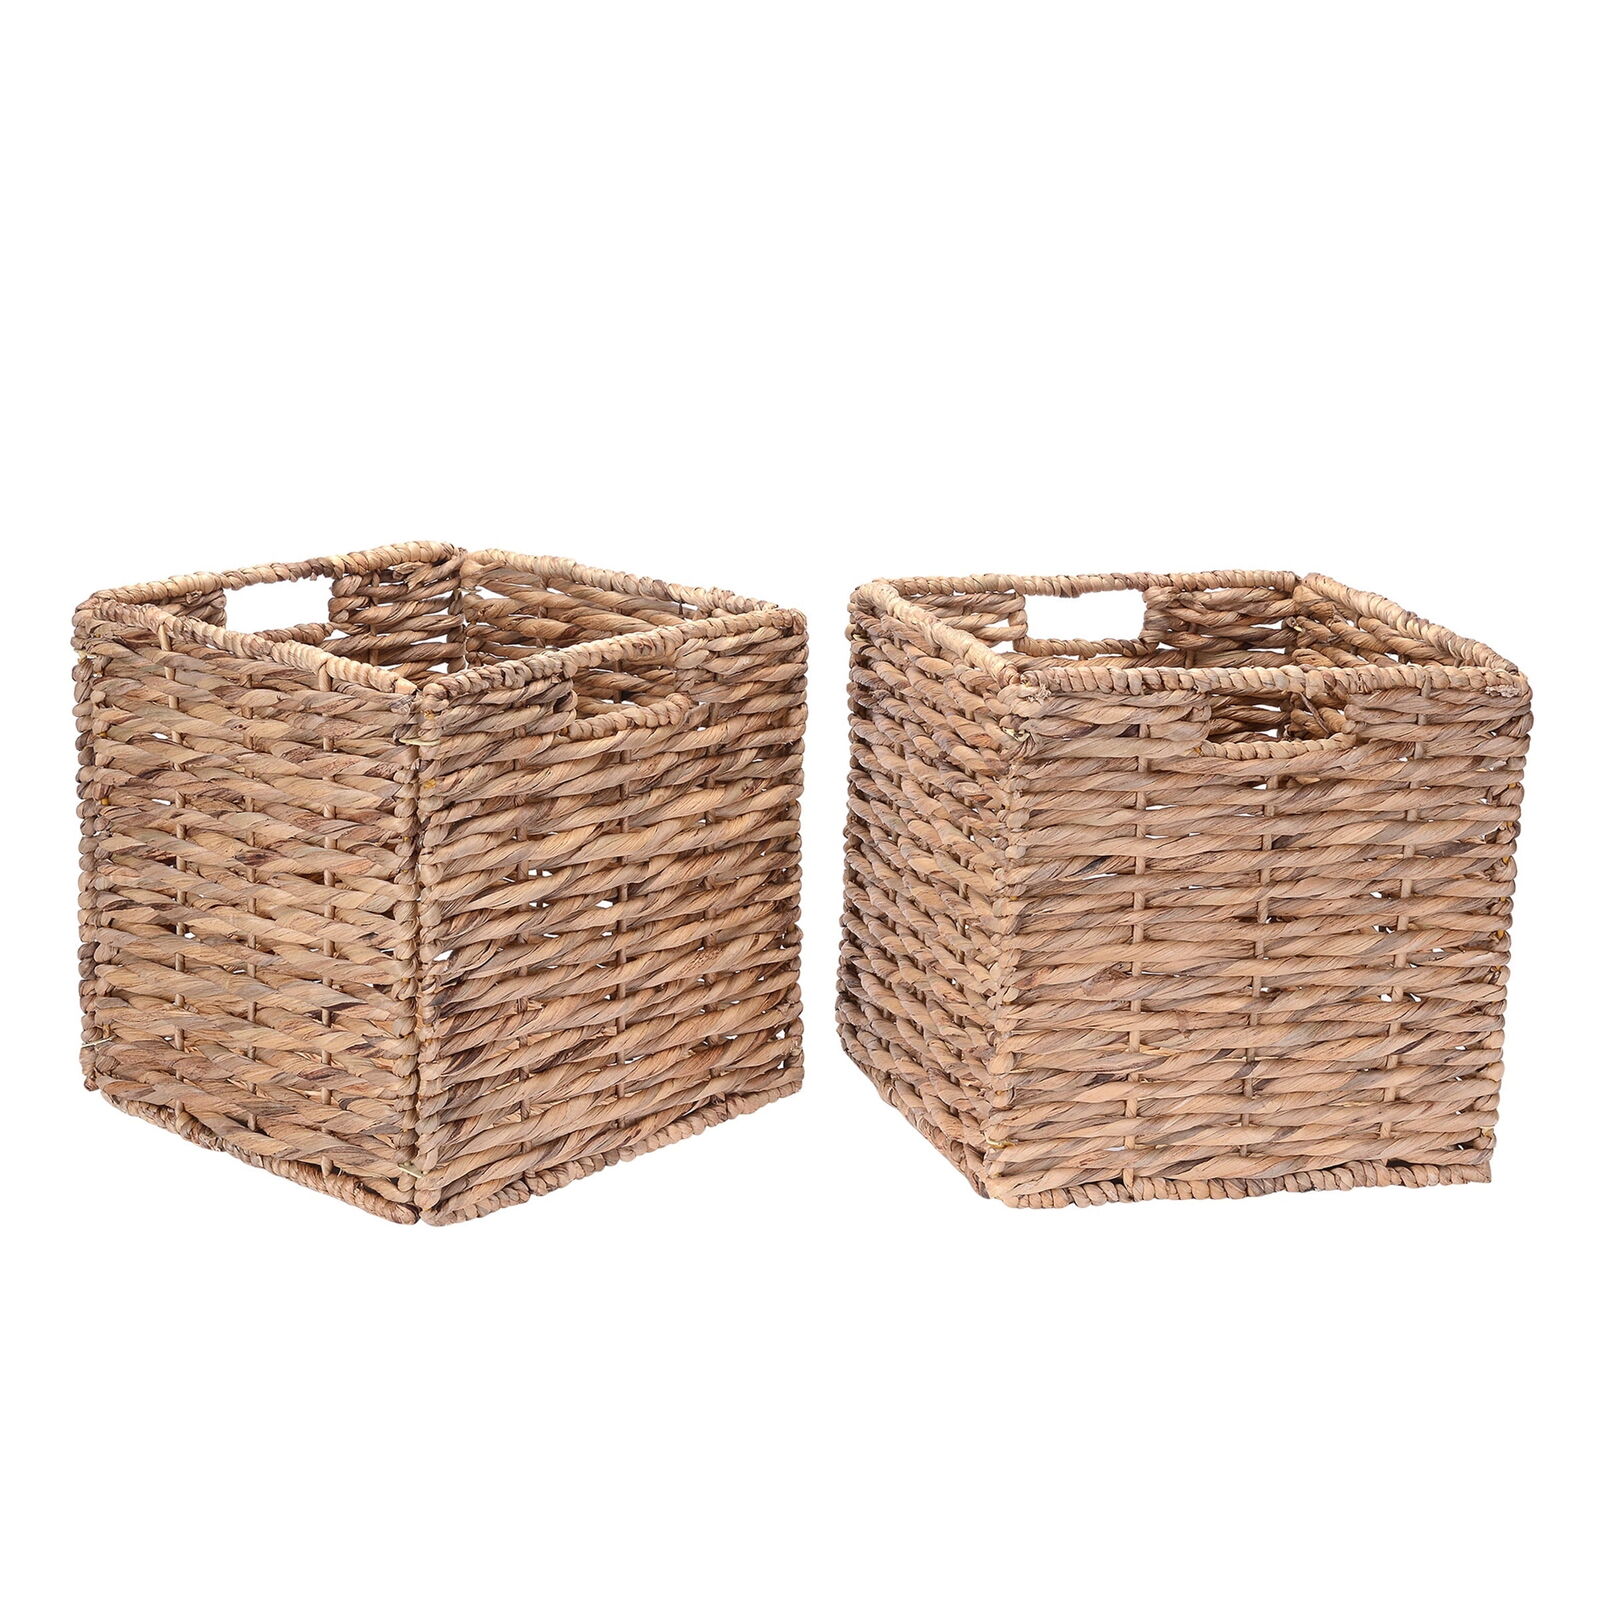 Villacera Set of 2 Handmade Twisted Wicker Baskets with Handles (Natural)